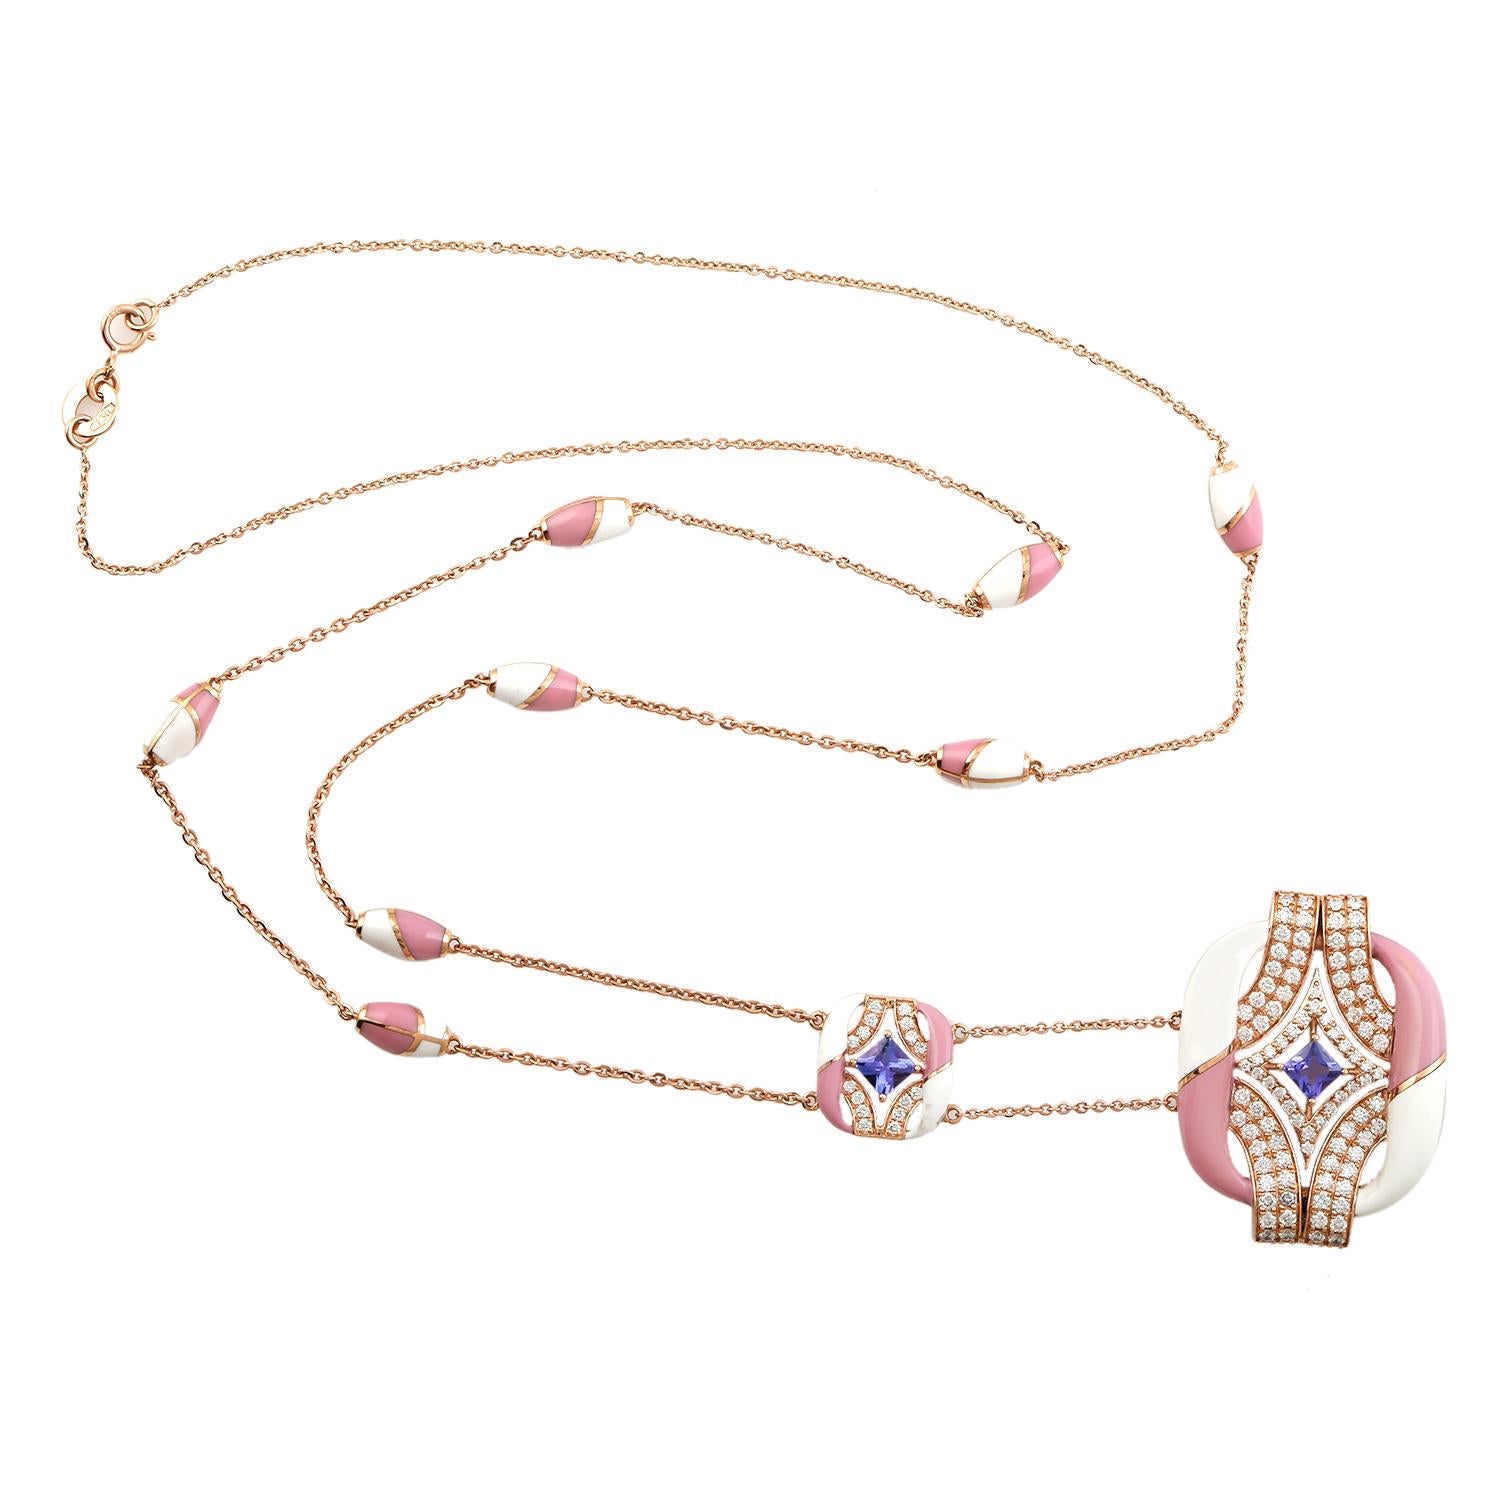 18k Rose Gold Necklace With Center Tanzanite and Pink & White Ceramic Stations For Sale 1